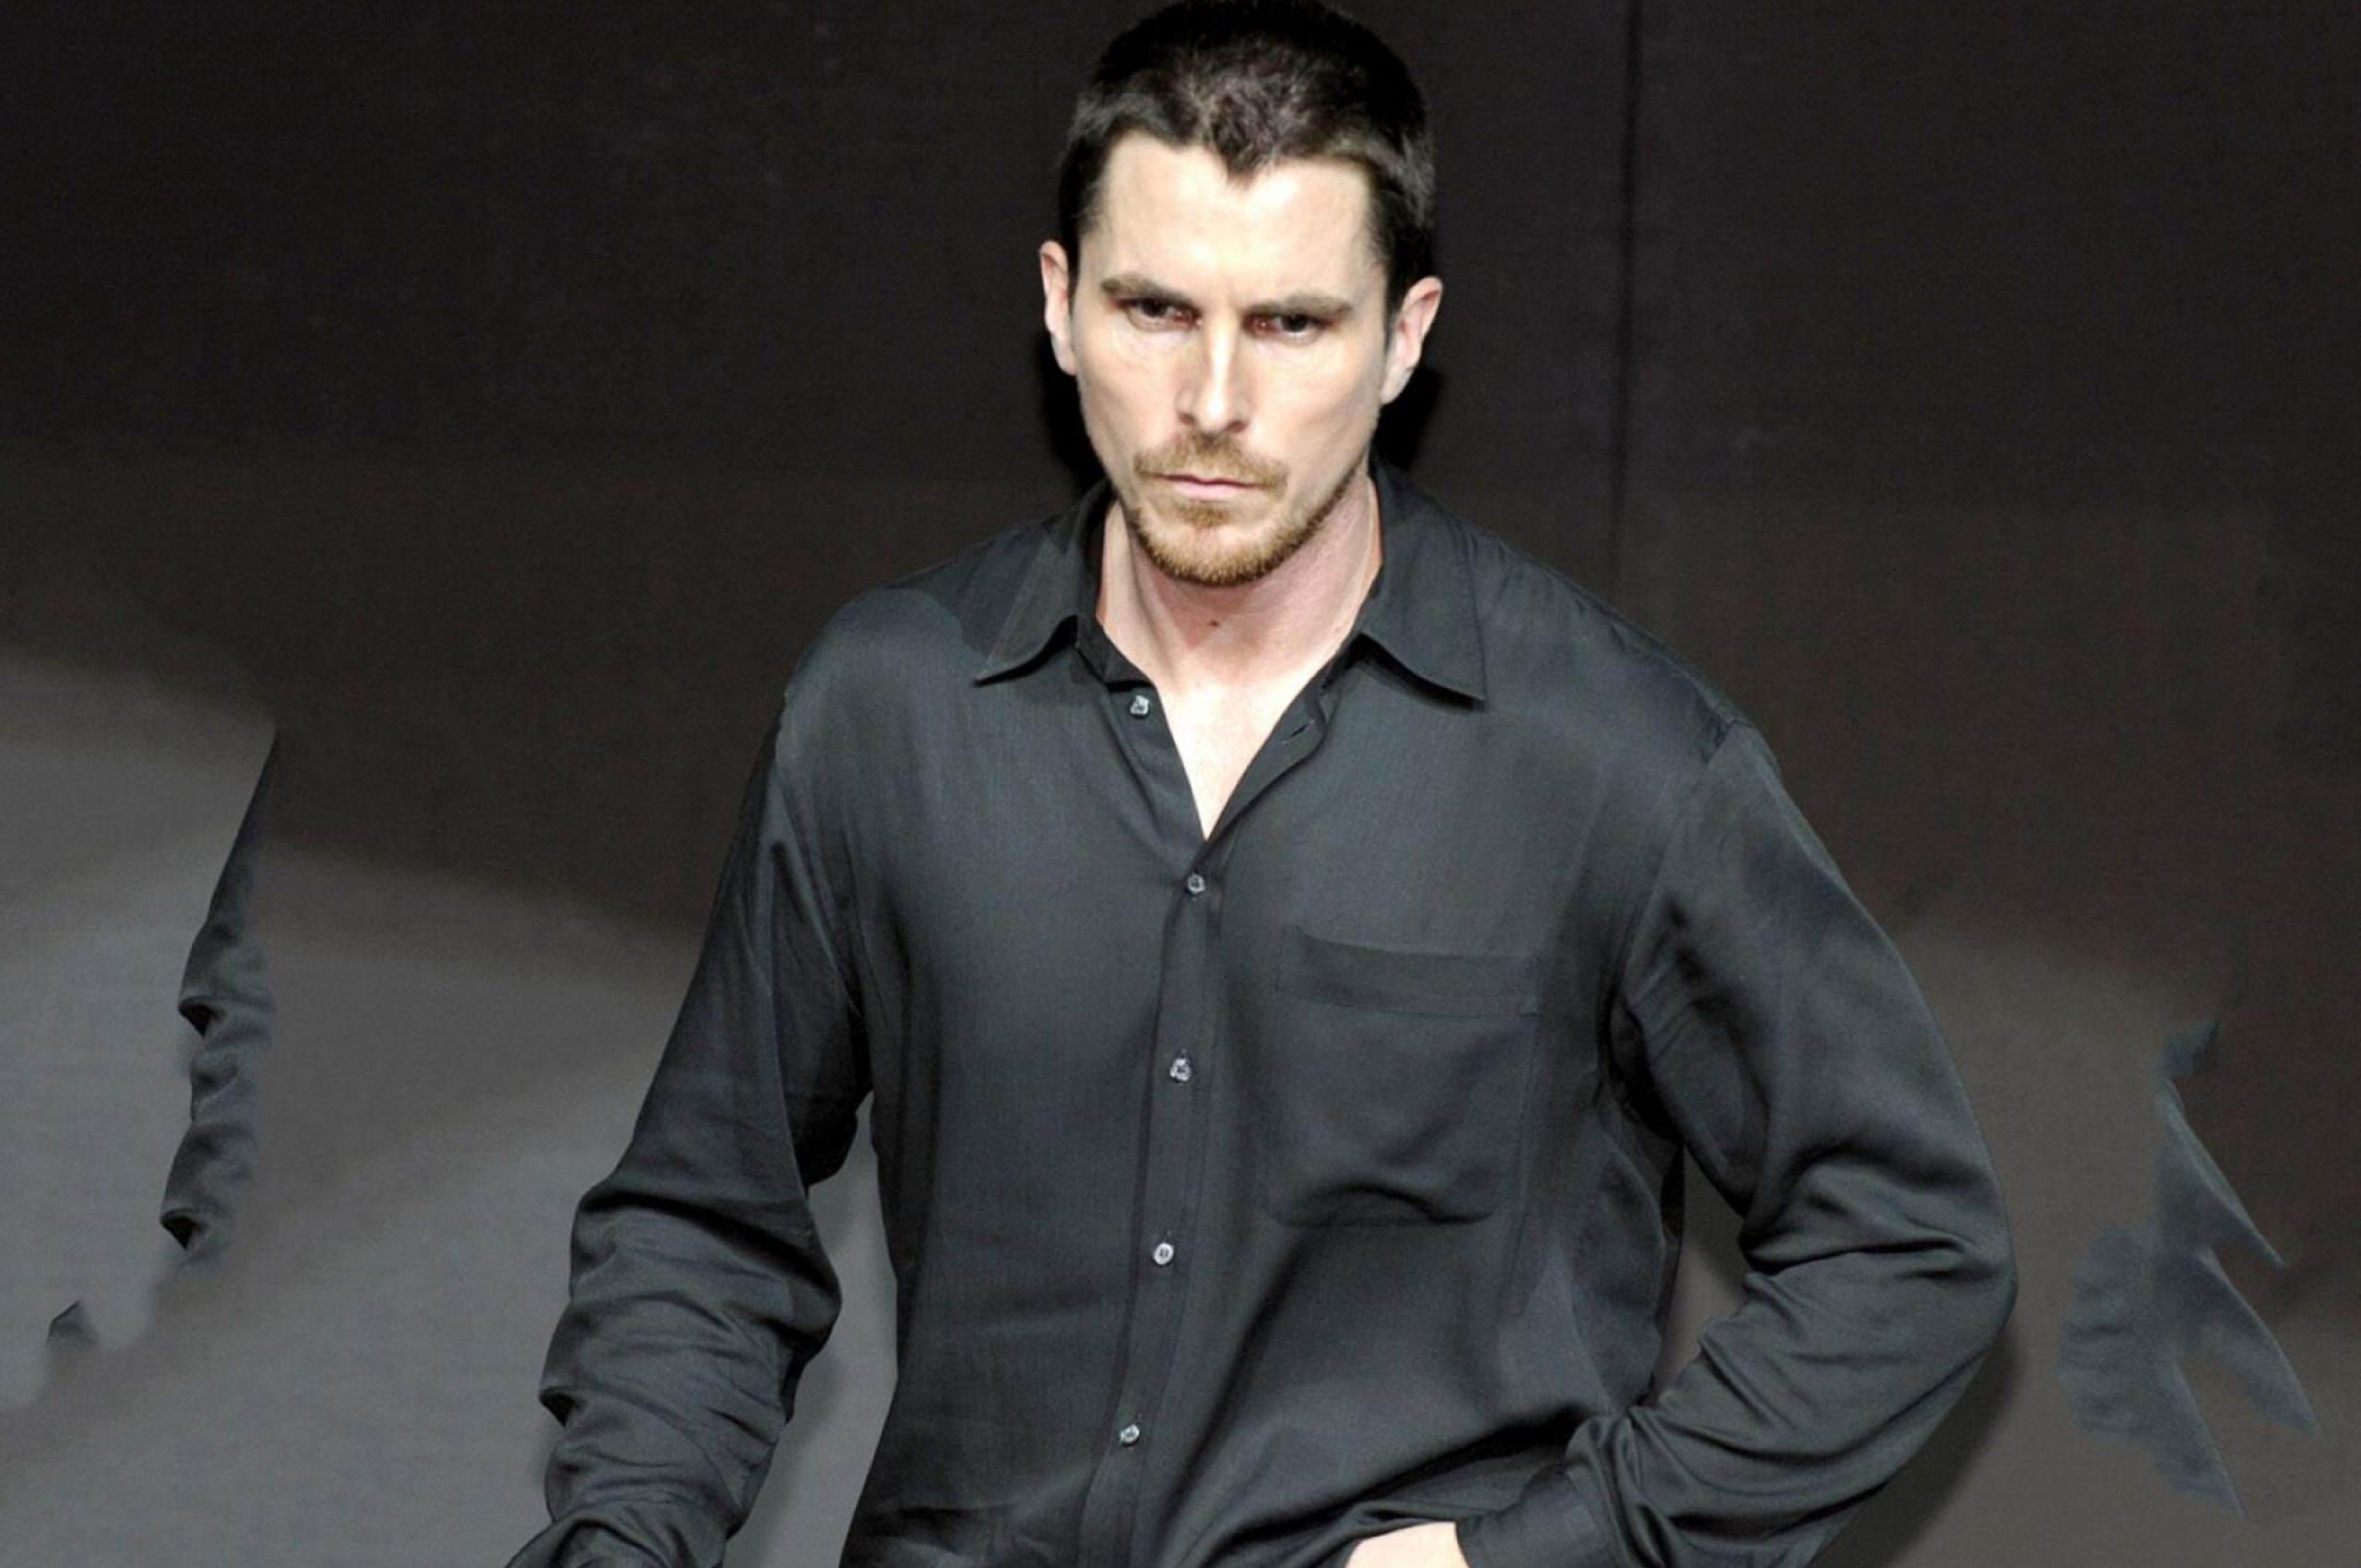 Christian Bale Actor